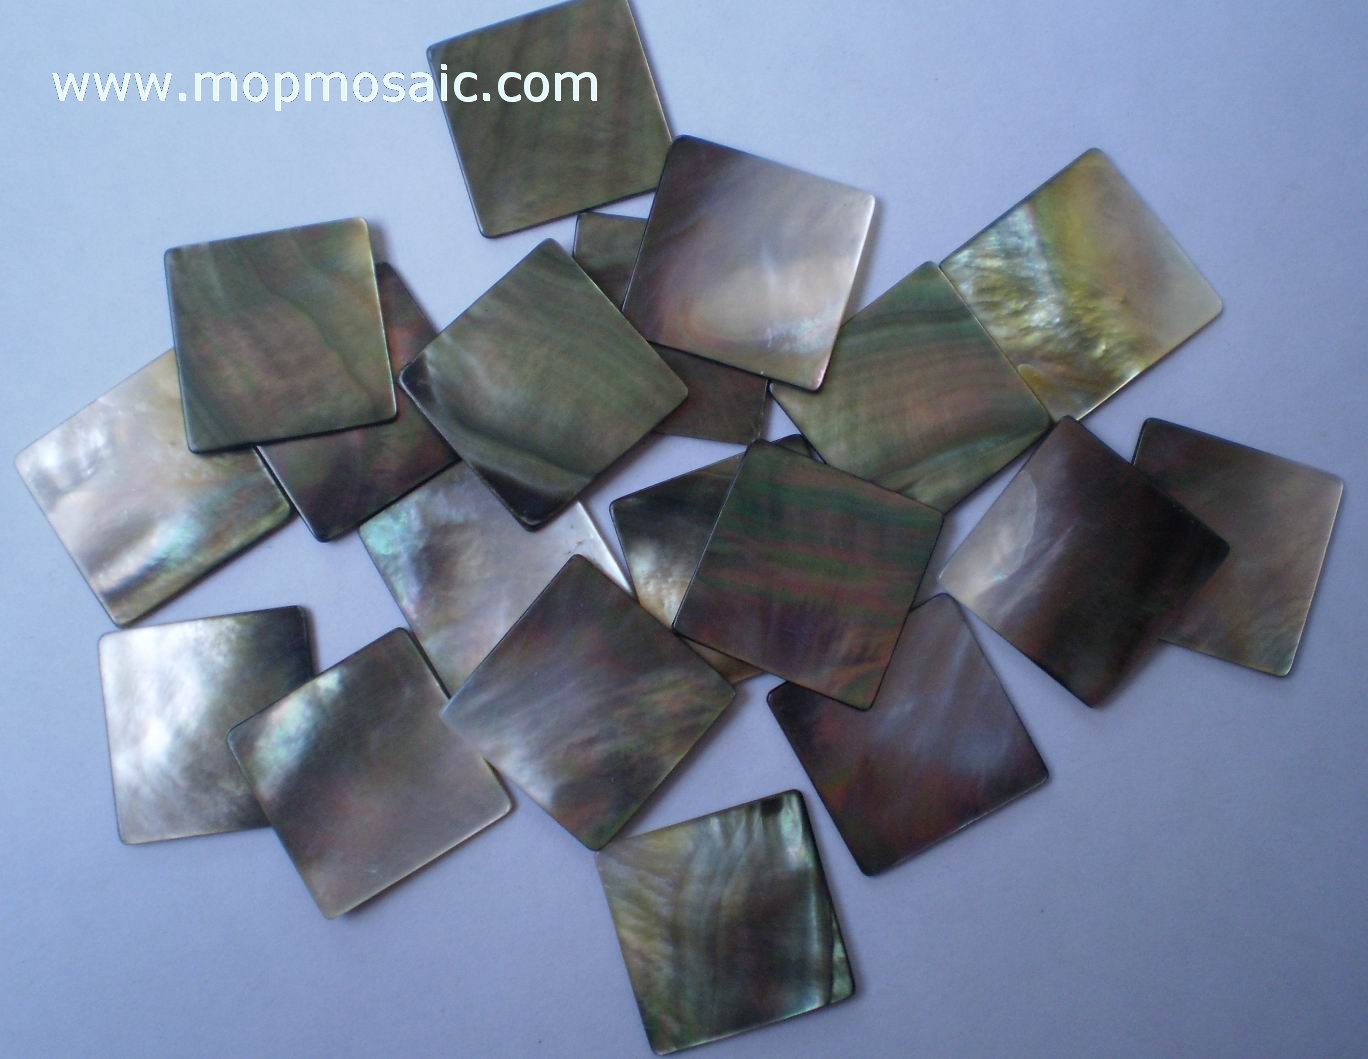 Blacklip mother of pearl shell tiles